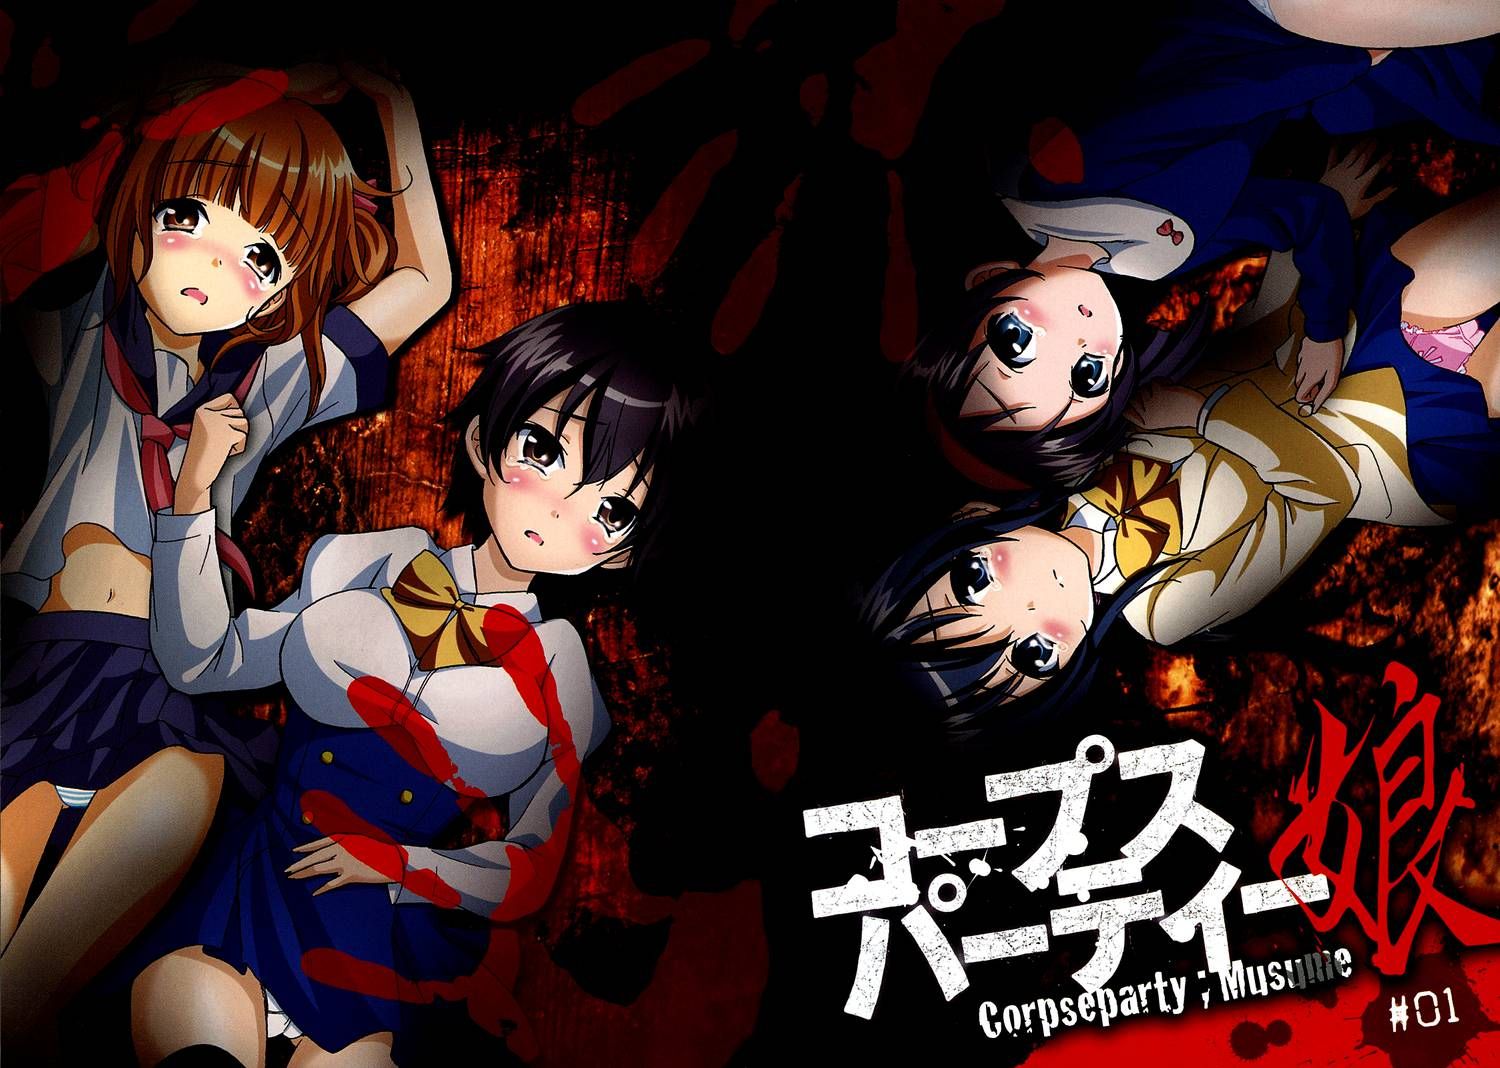 Corpse Party: Musume 1